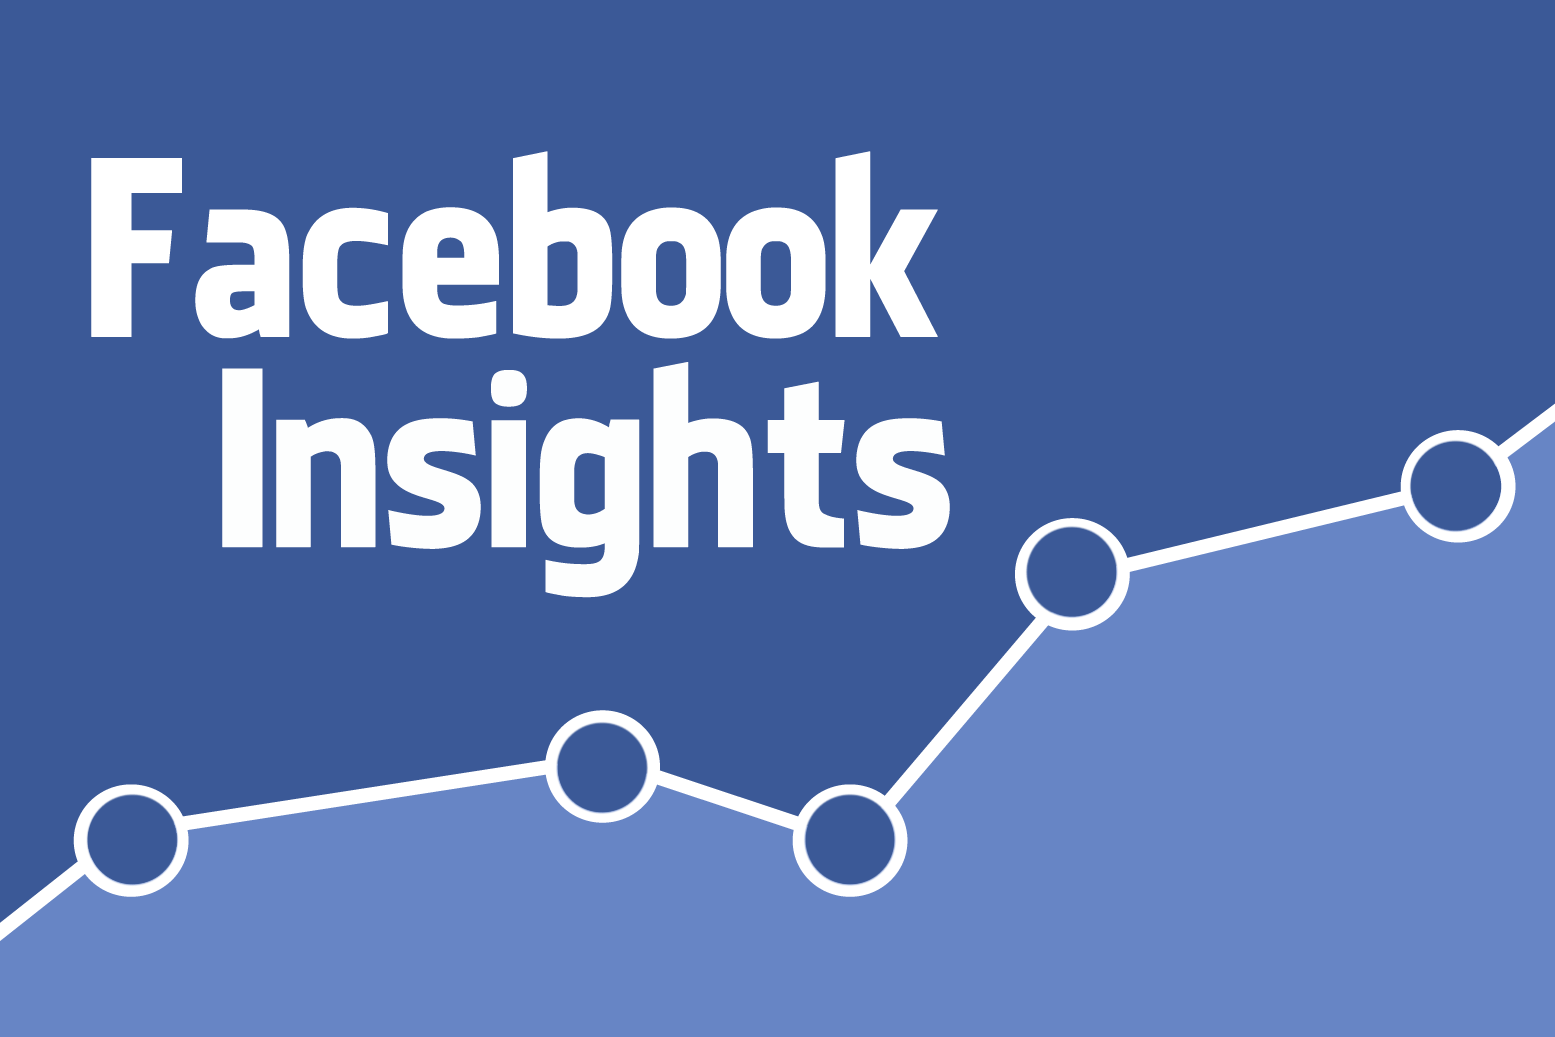 How to Use Facebook Insights to Understand Your Audience Better